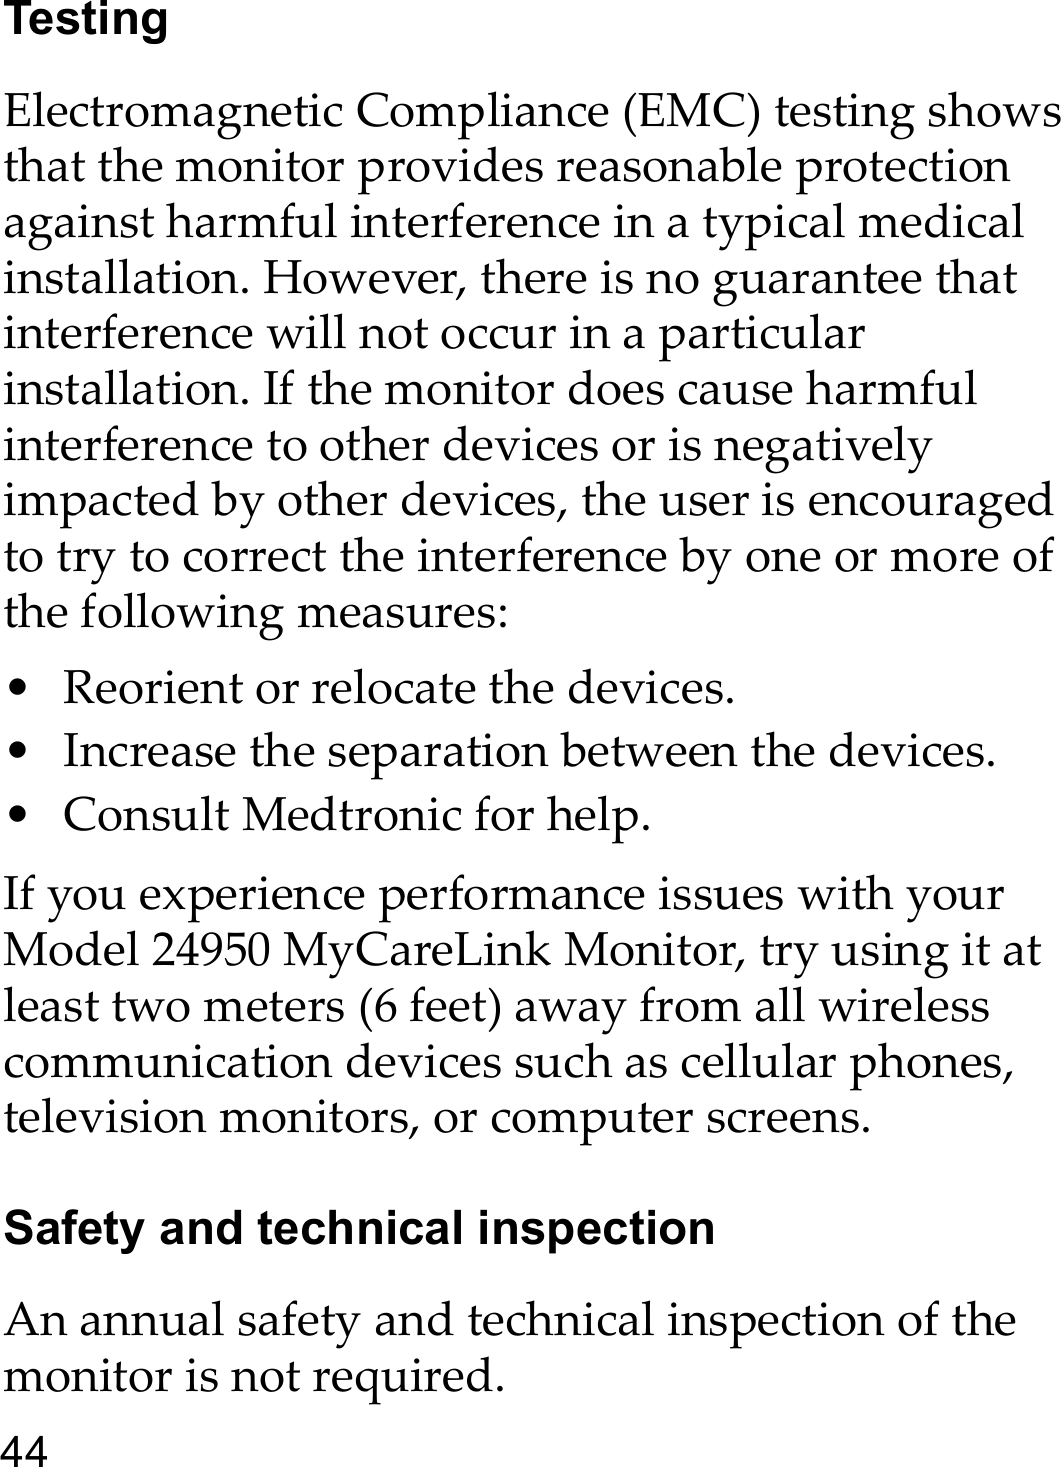 44TestingElectromagnetic Compliance (EMC) testing shows that the monitor provides reasonable protection against harmful interference in a typical medical installation. However, there is no guarantee that interference will not occur in a particular installation. If the monitor does cause harmful interference to other devices or is negatively impacted by other devices, the user is encouraged to try to correct the interference by one or more of the following measures:• Reorient or relocate the devices.• Increase the separation between the devices.• Consult Medtronic for help.If you experience performance issues with your Model 24950 MyCareLink Monitor, try using it at least two meters (6 feet) away from all wireless communication devices such as cellular phones, television monitors, or computer screens.Safety and technical inspectionAn annual safety and technical inspection of the monitor is not required.